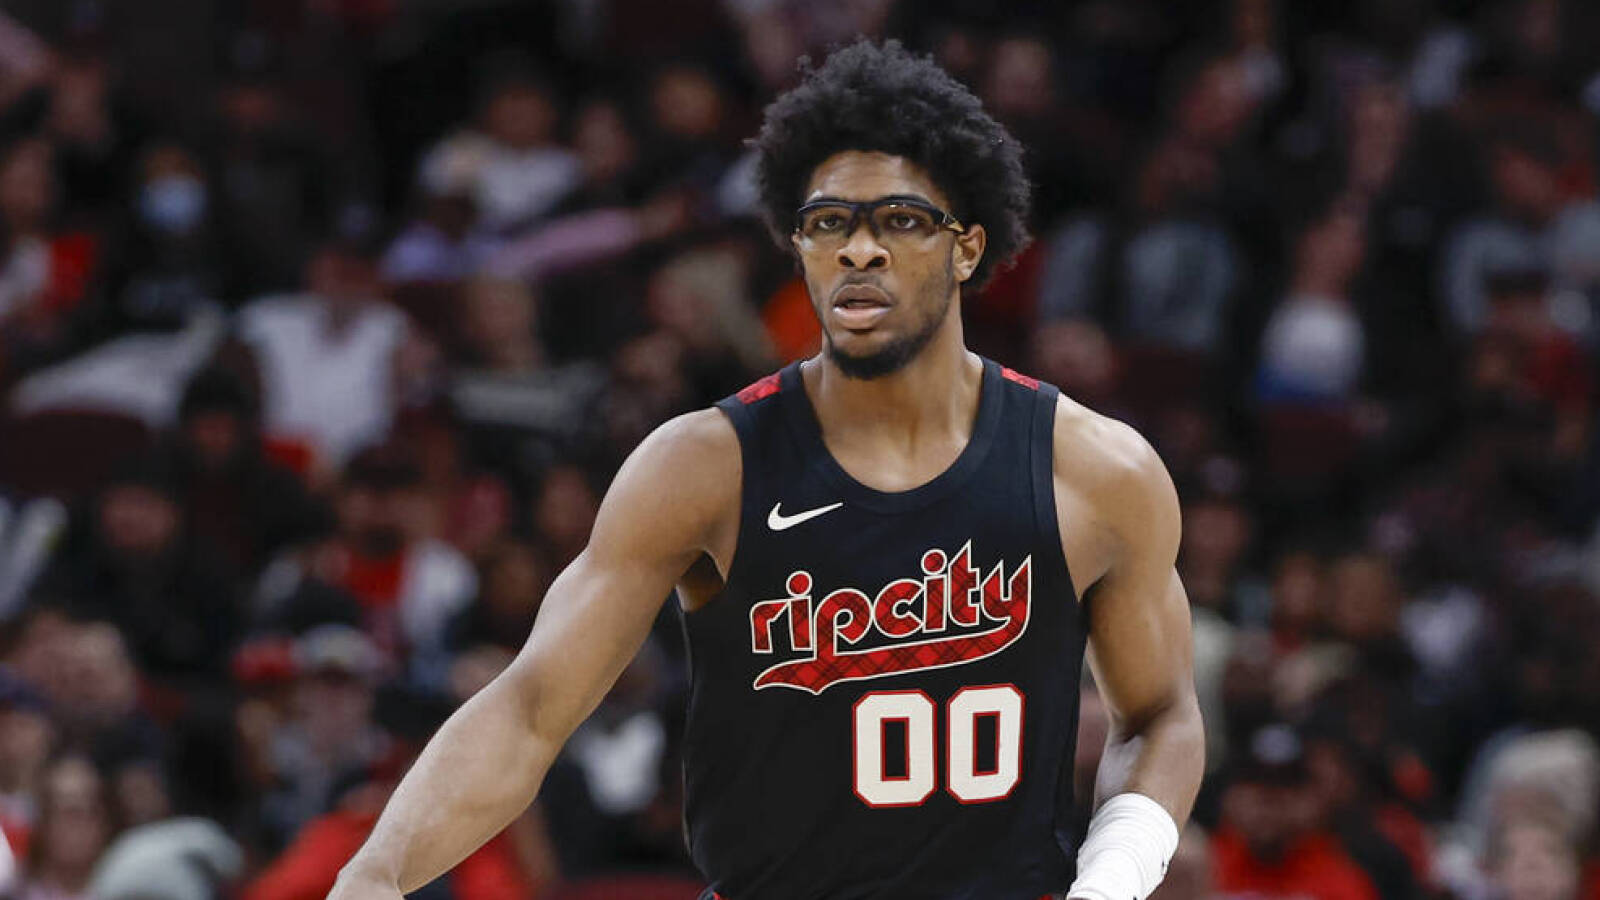 Blazers rookie sets hideous record in blowout loss